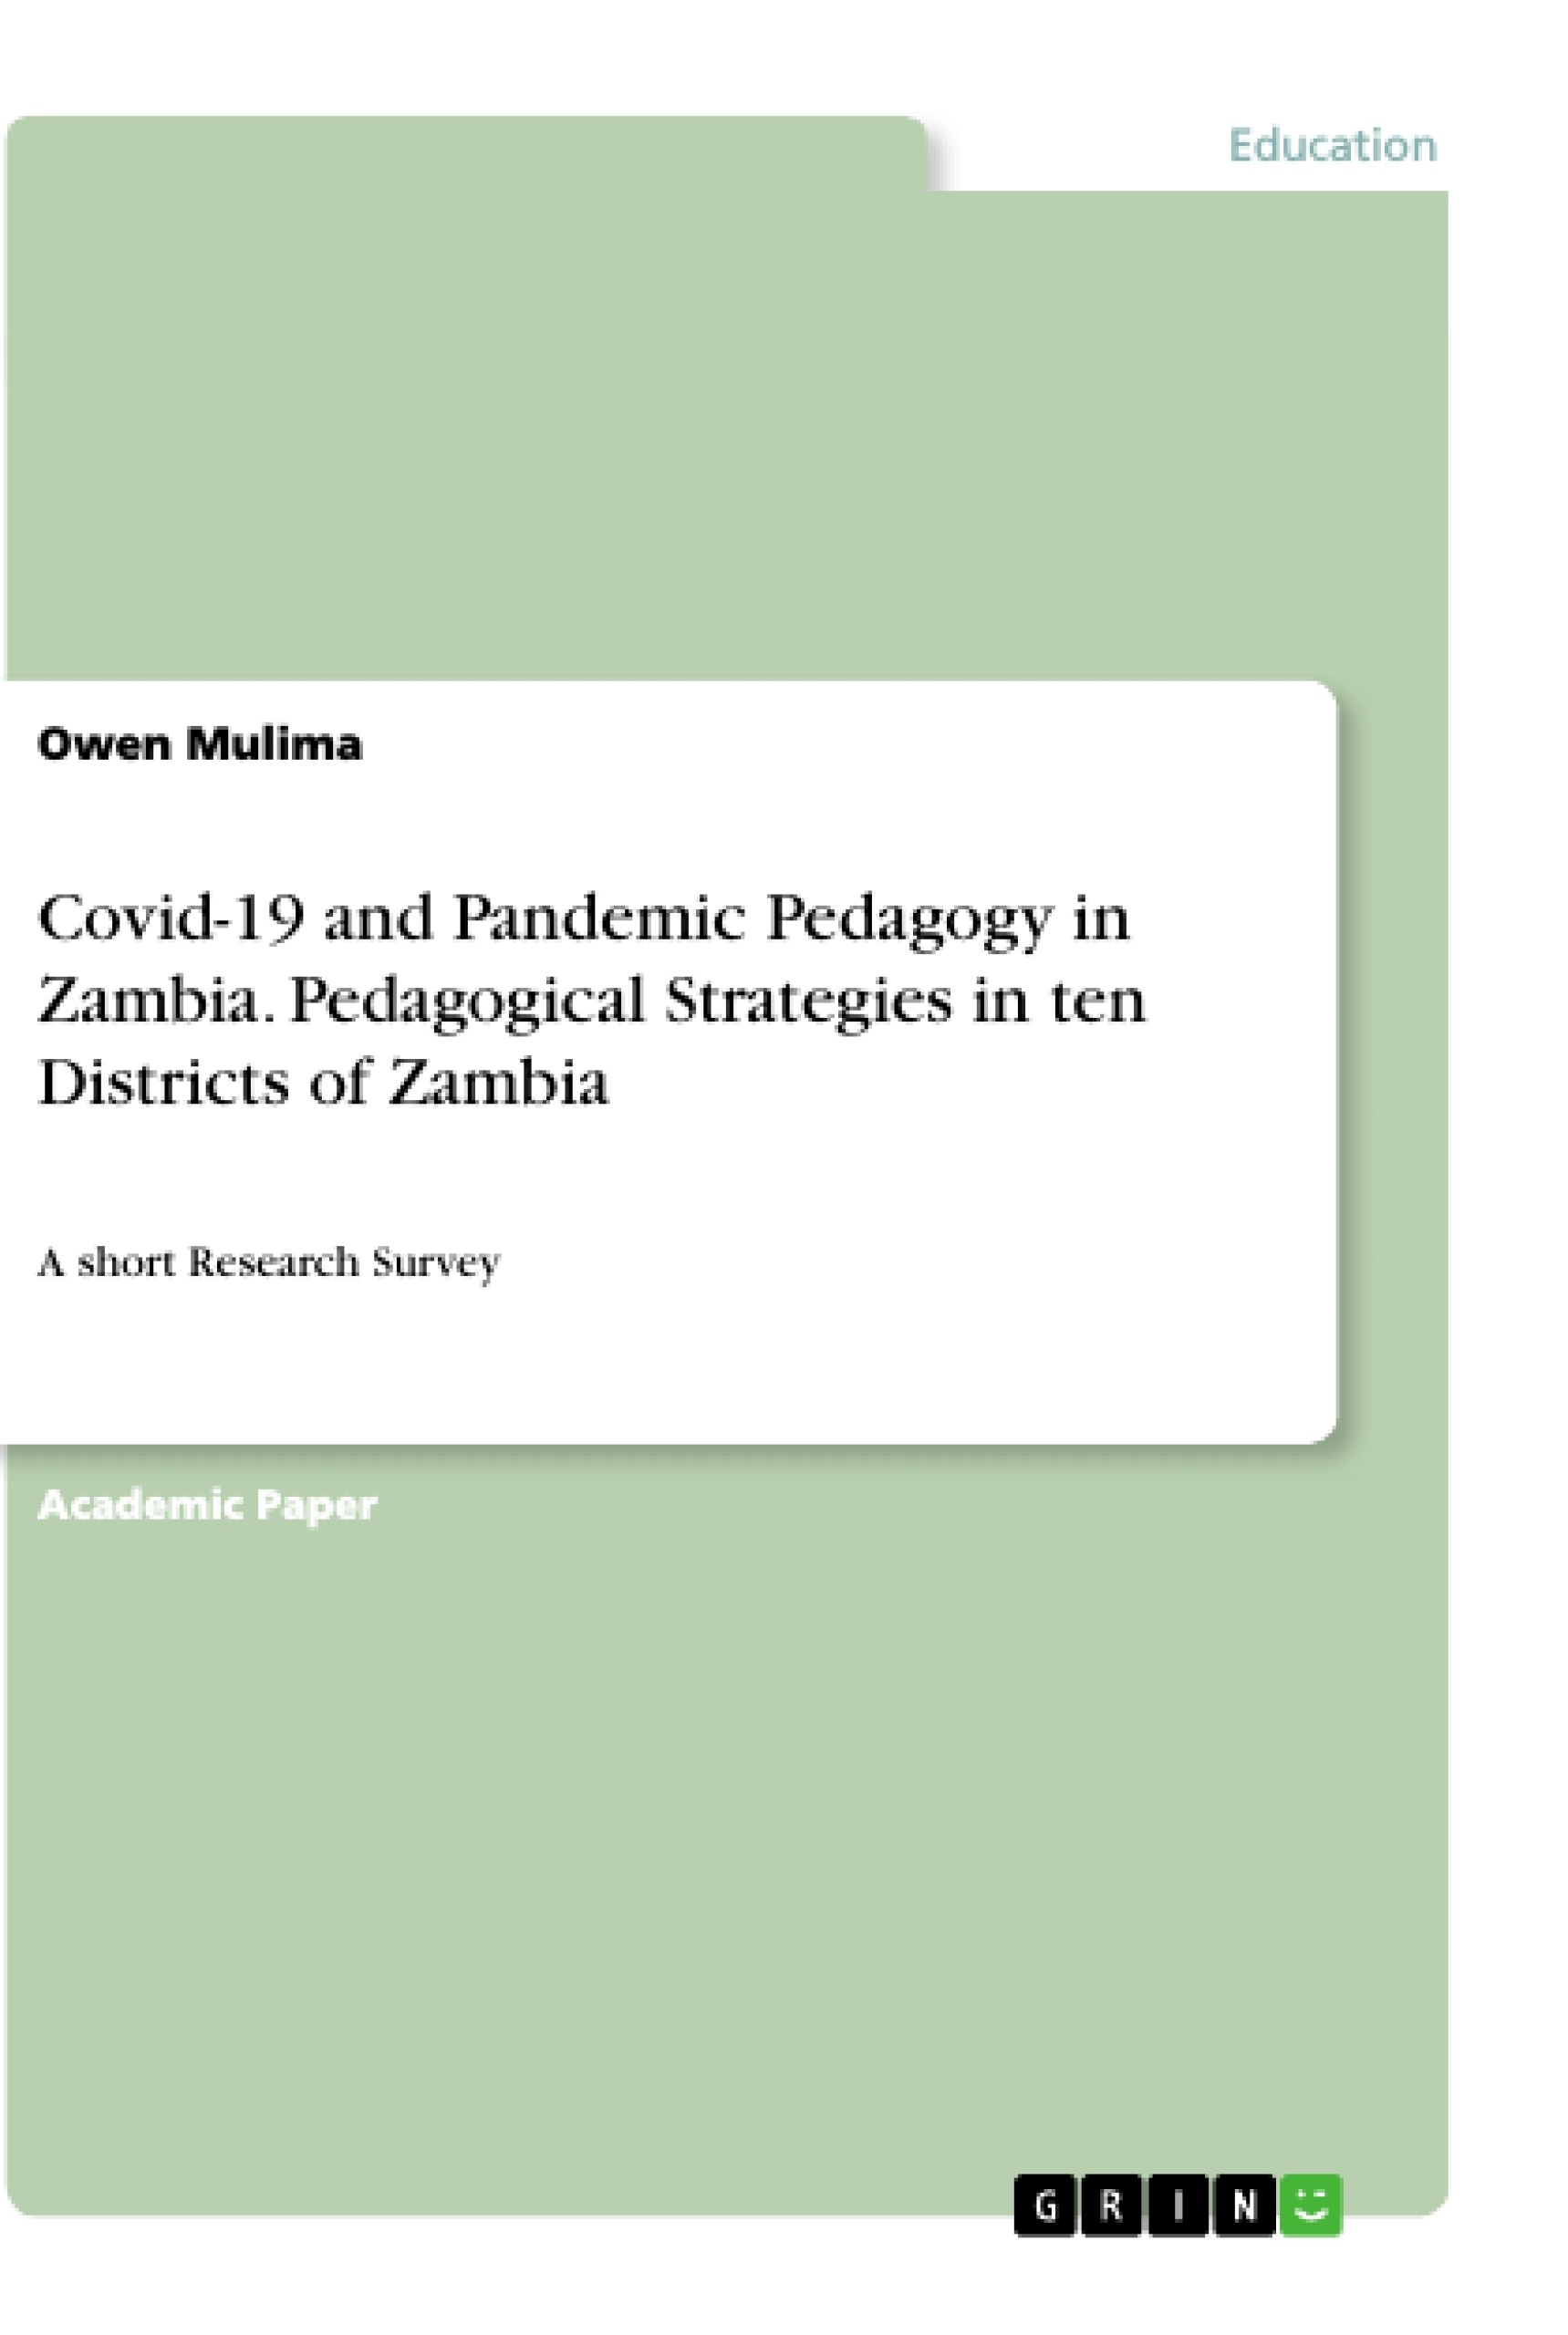 Title: Covid-19 and Pandemic Pedagogy in Zambia. Pedagogical Strategies in ten Districts of Zambia